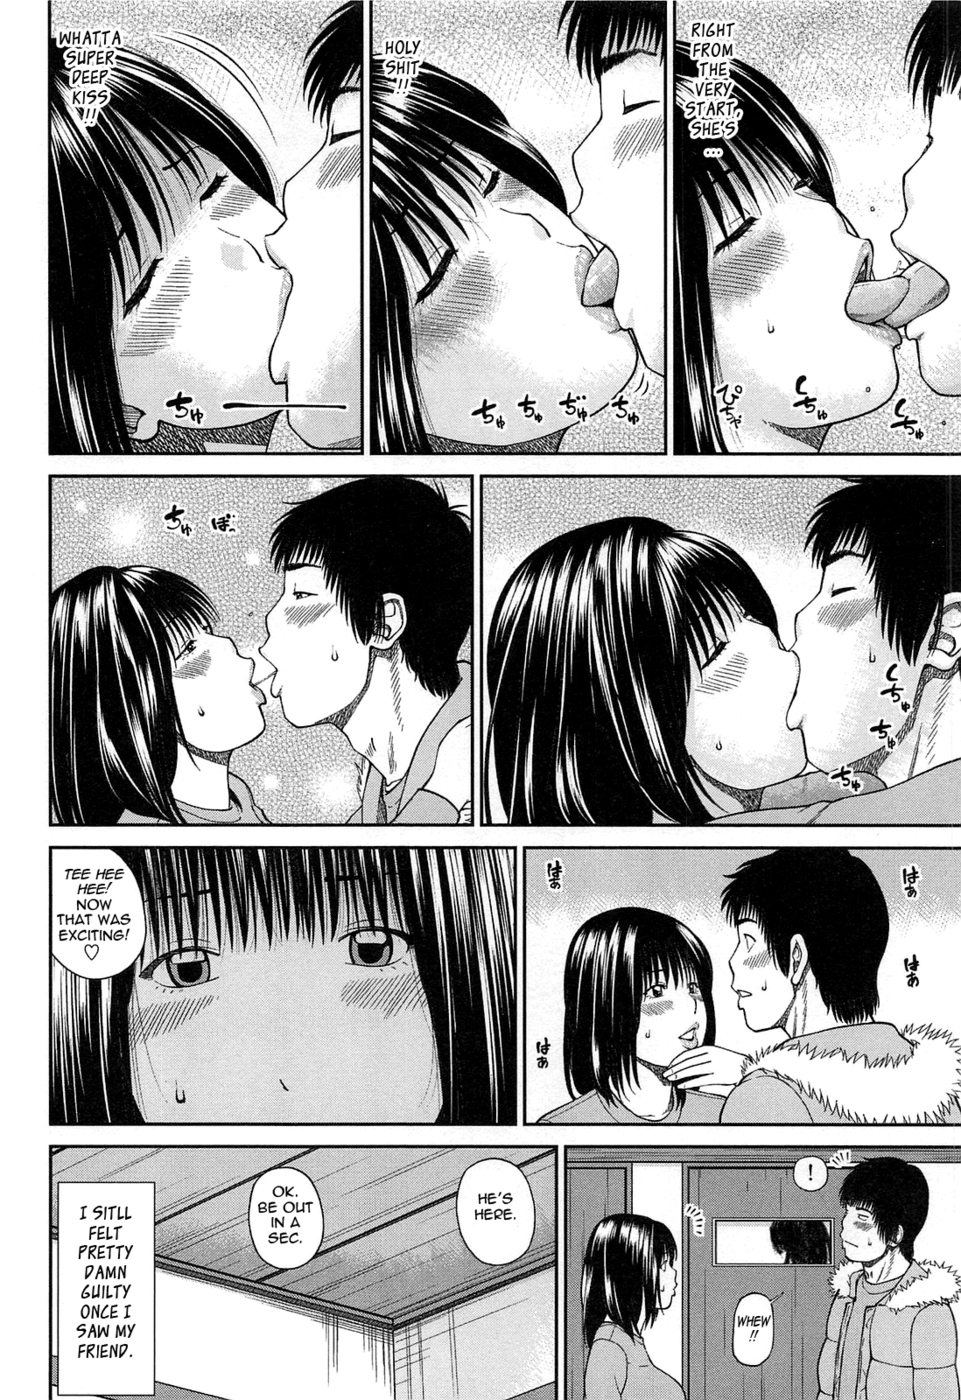 Hentai Manga Comic-35 Year Old Ripe Wife-Chapter 3-The Plan For A Fling With My Friend's Wife-8